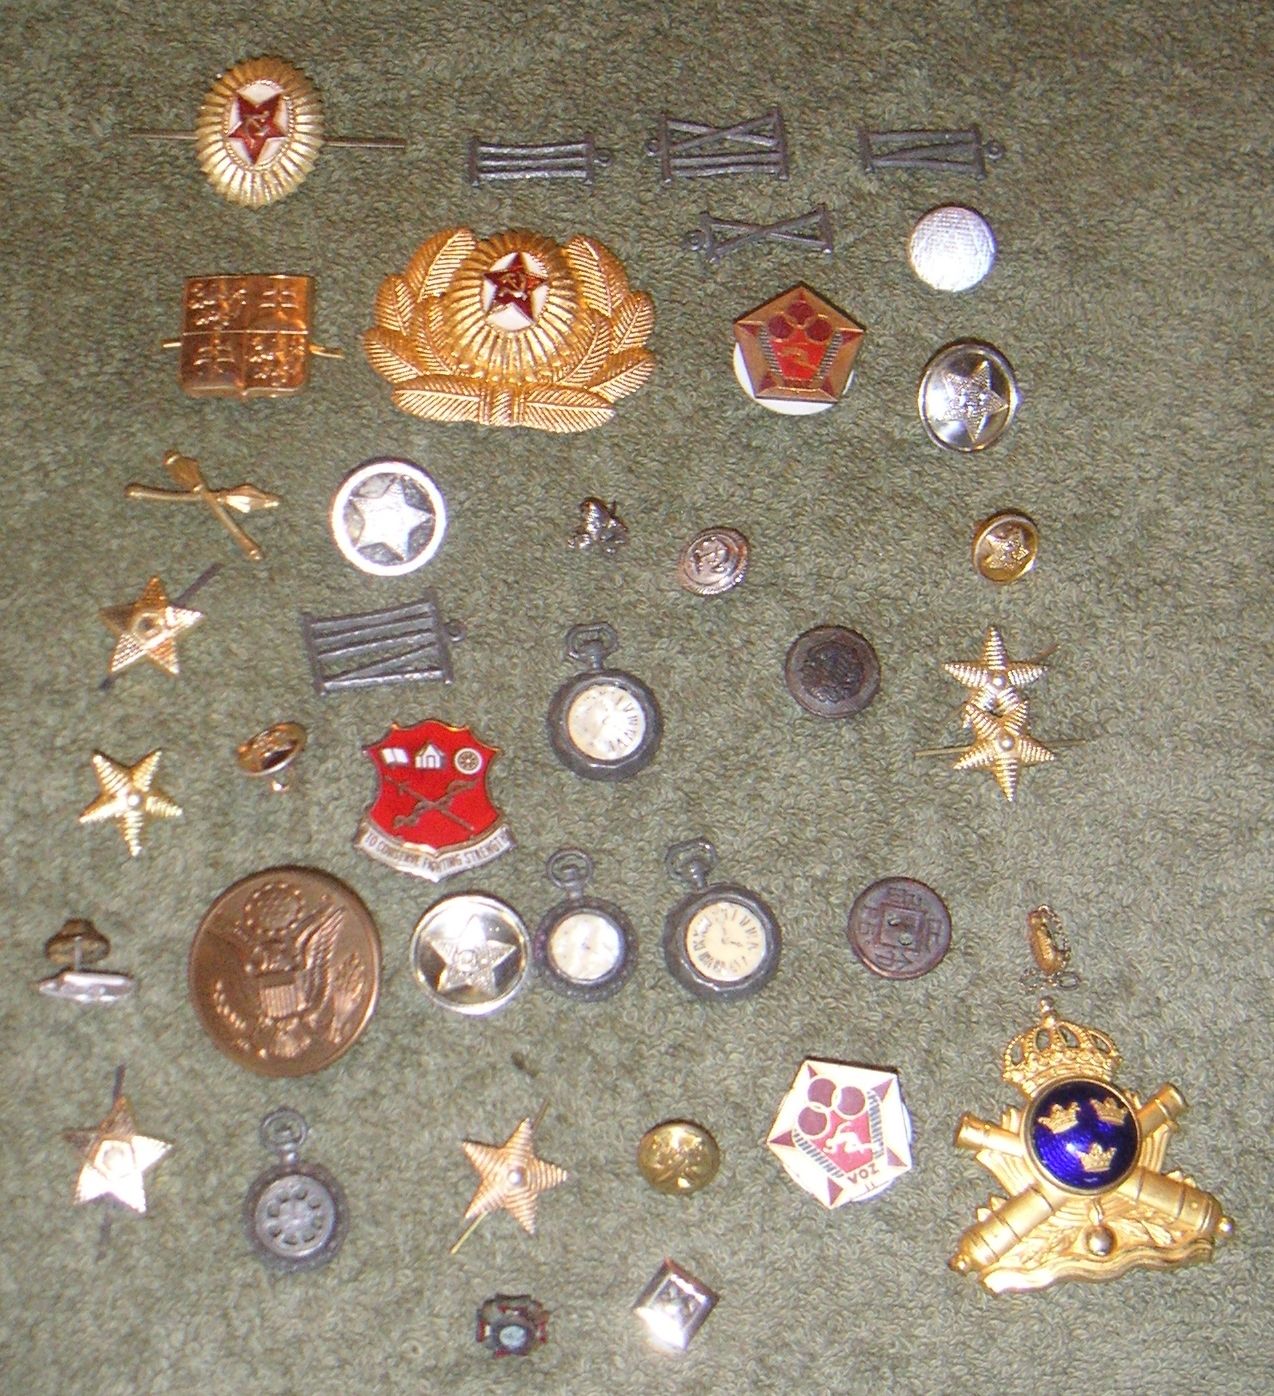 Large Lot of Russian Military Pins Badges Medals Antique Clock Buttons ...